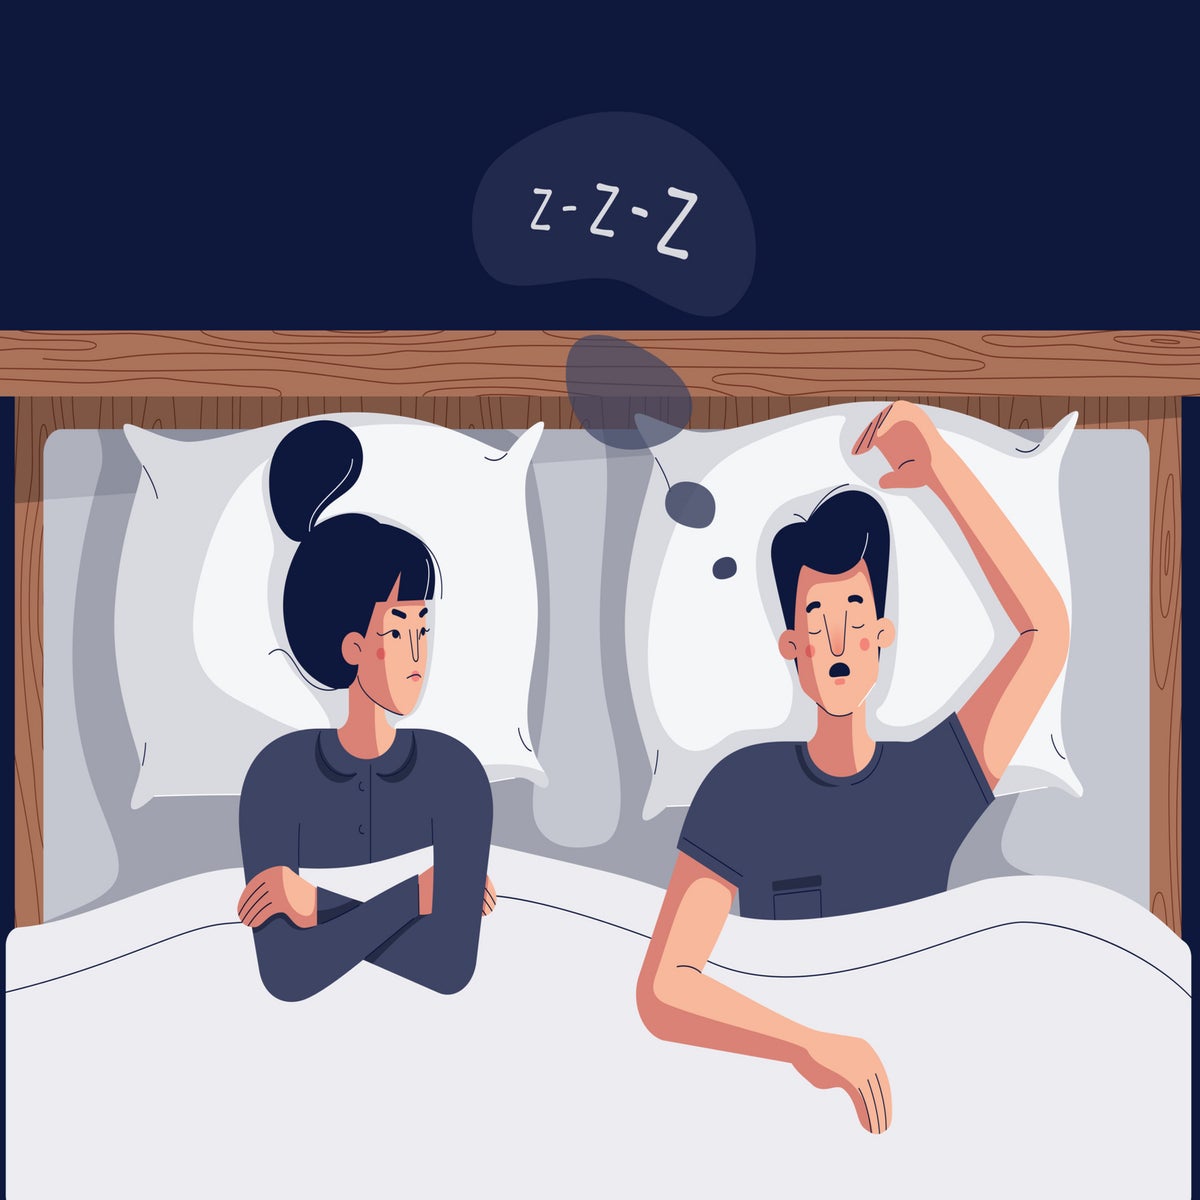 Couples sleeping in separate bedrooms: How to talk to kids about it